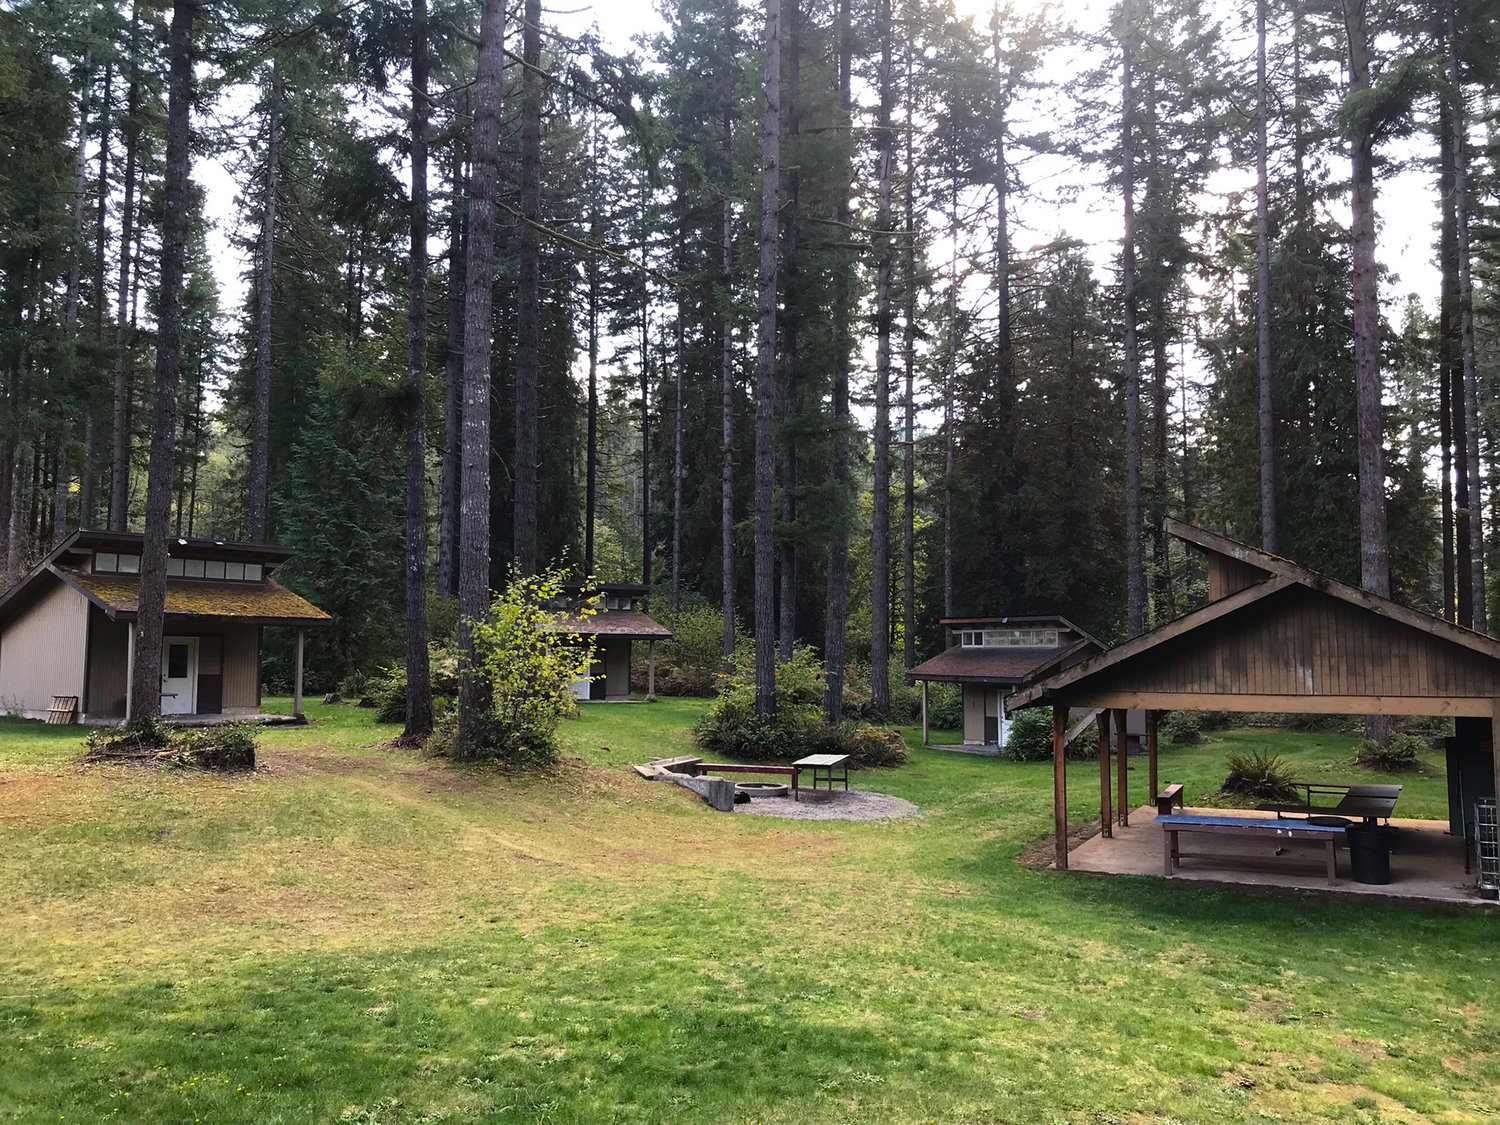 Camp Hope, located north of Battle Ground, provides extracurricular opportunities for school-age children in southwest Washington.